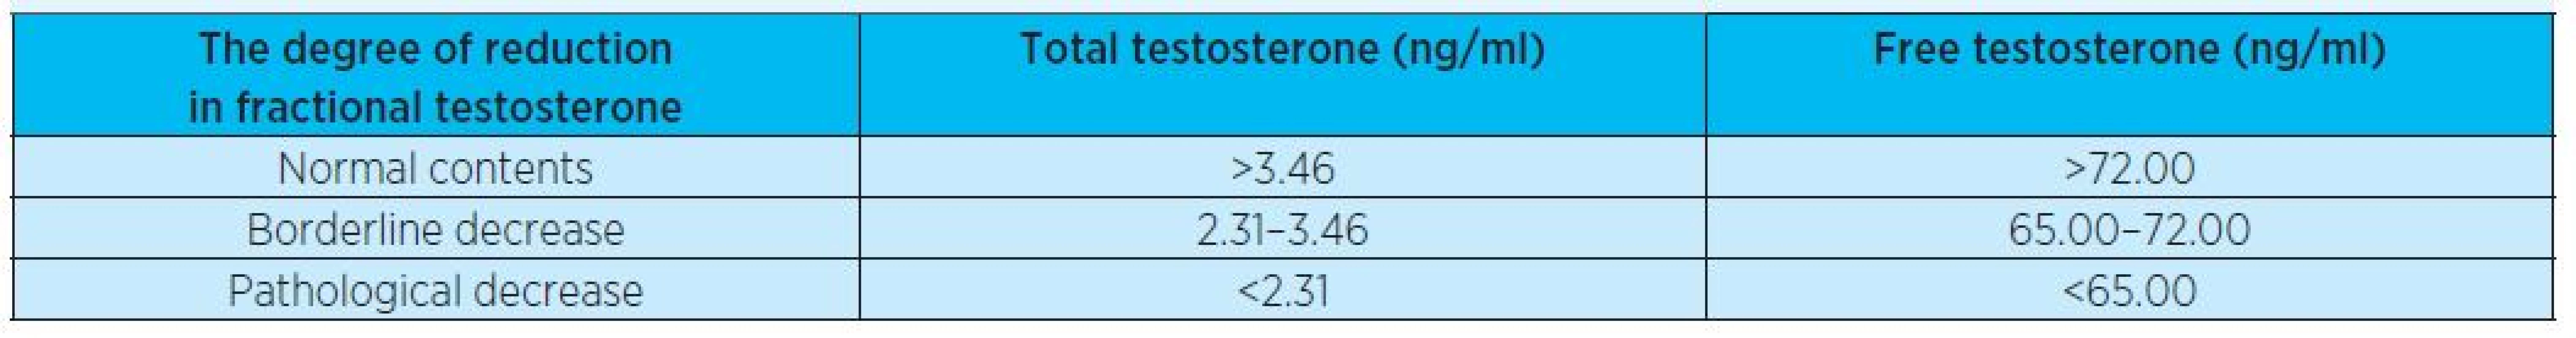 Ranking the total and free testosterone levels, depending on its degree of reduction in the blood serum